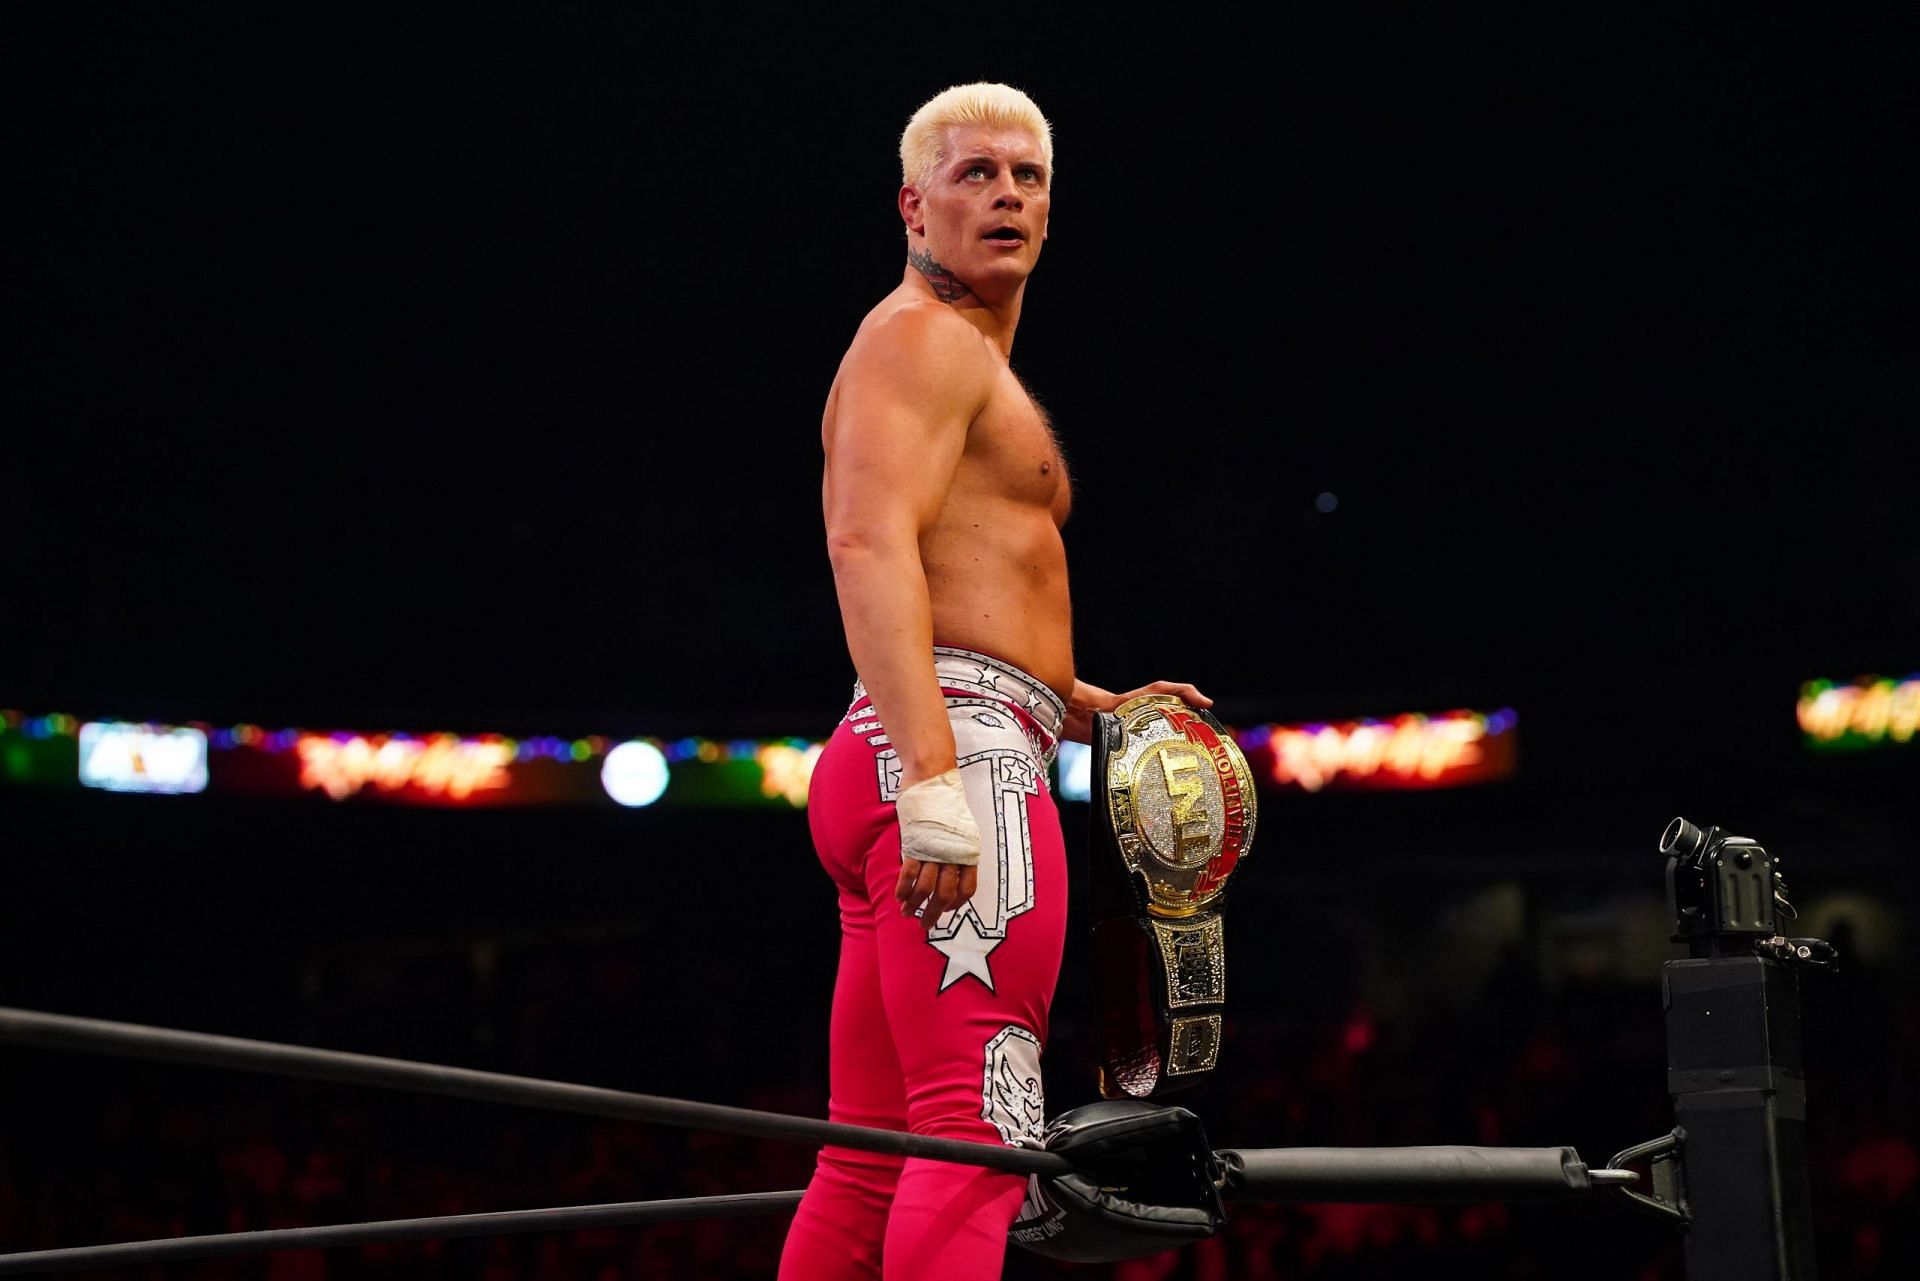 Cody Rhodes is the reigning TNT Champion and has held the belt thrice